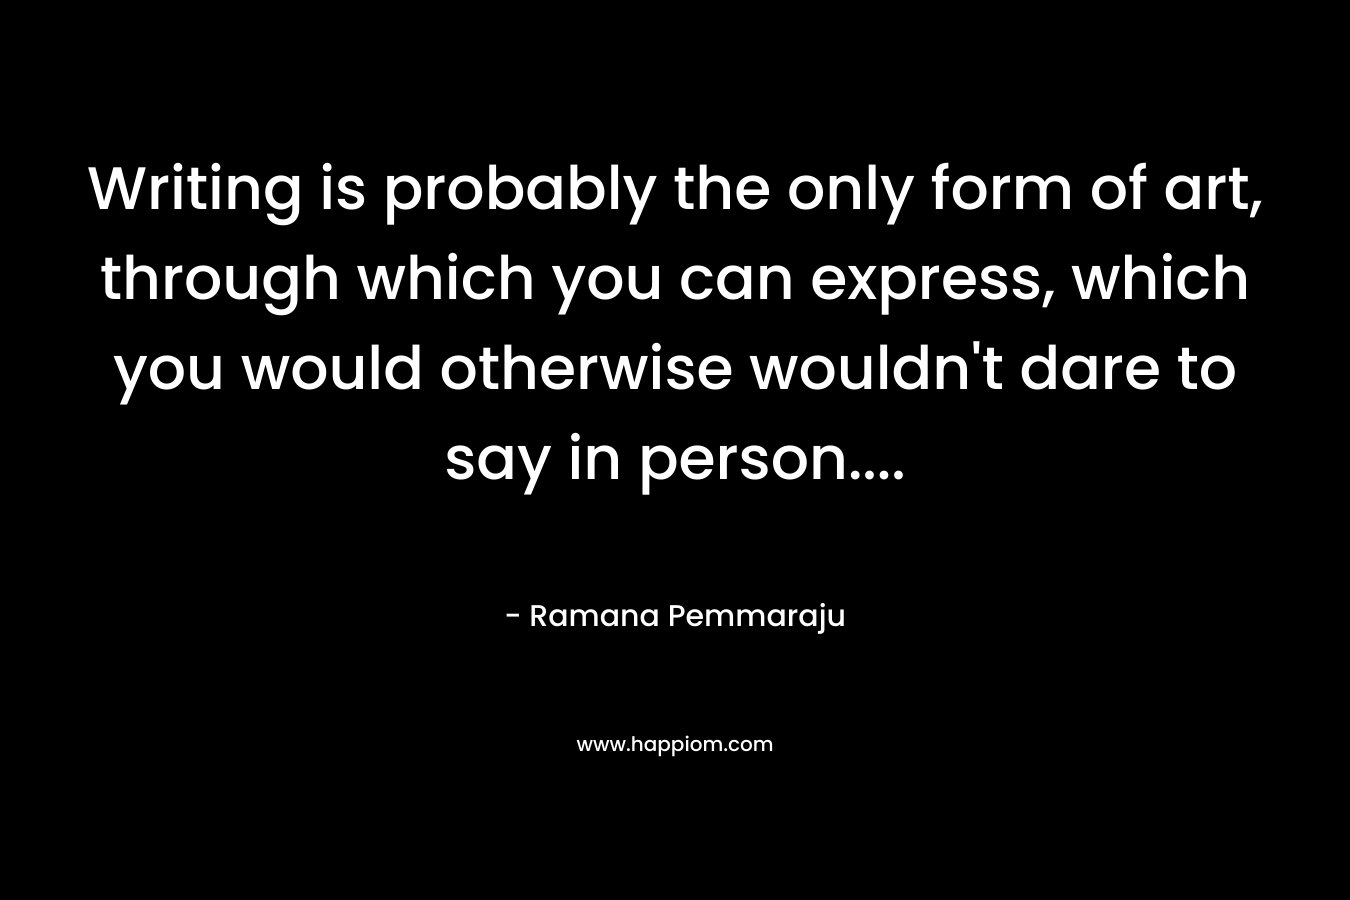 Writing is probably the only form of art, through which you can express, which you would otherwise wouldn't dare to say in person....